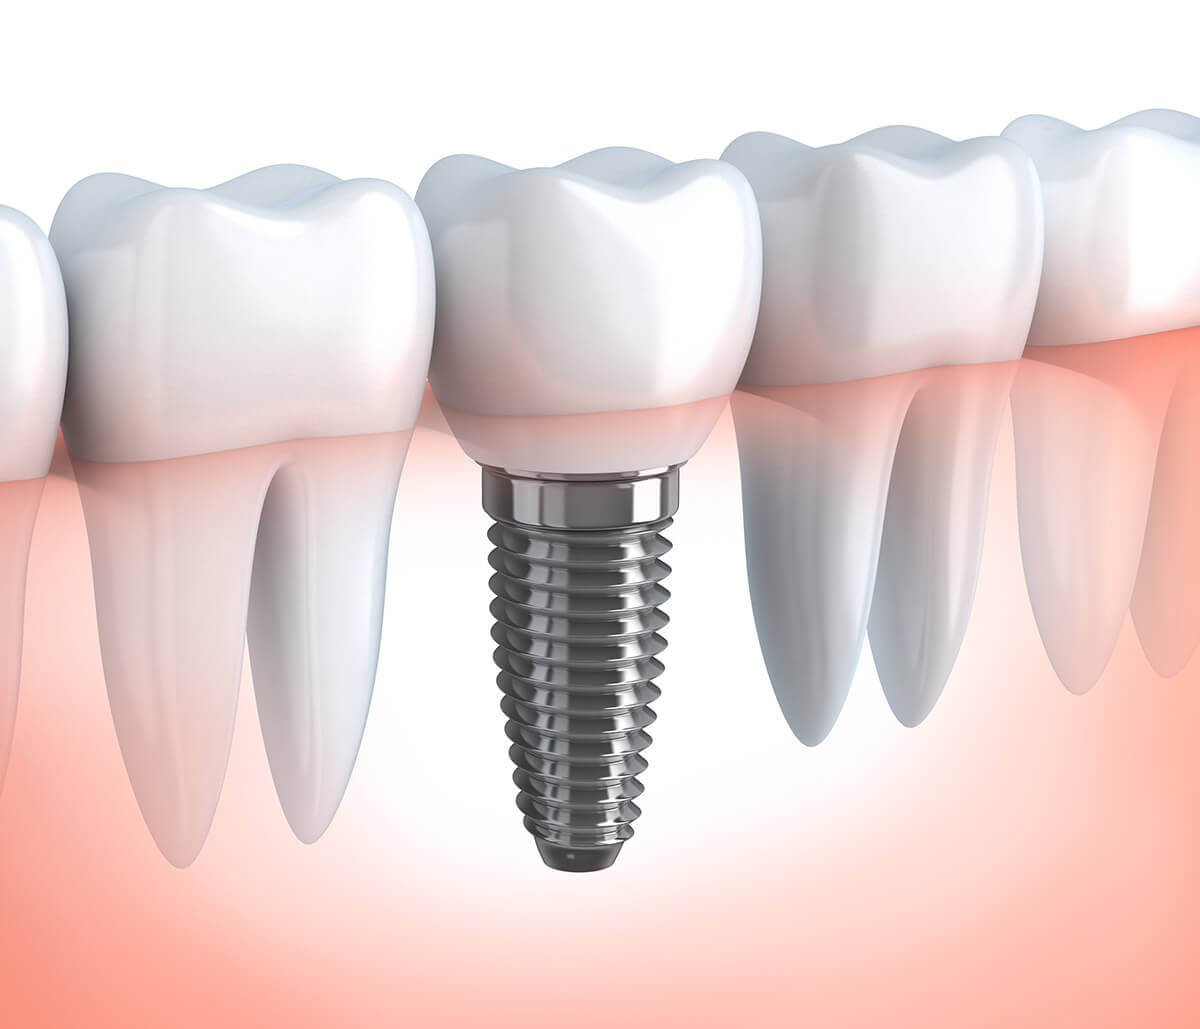 Implant Dentistry in Los Angeles Area